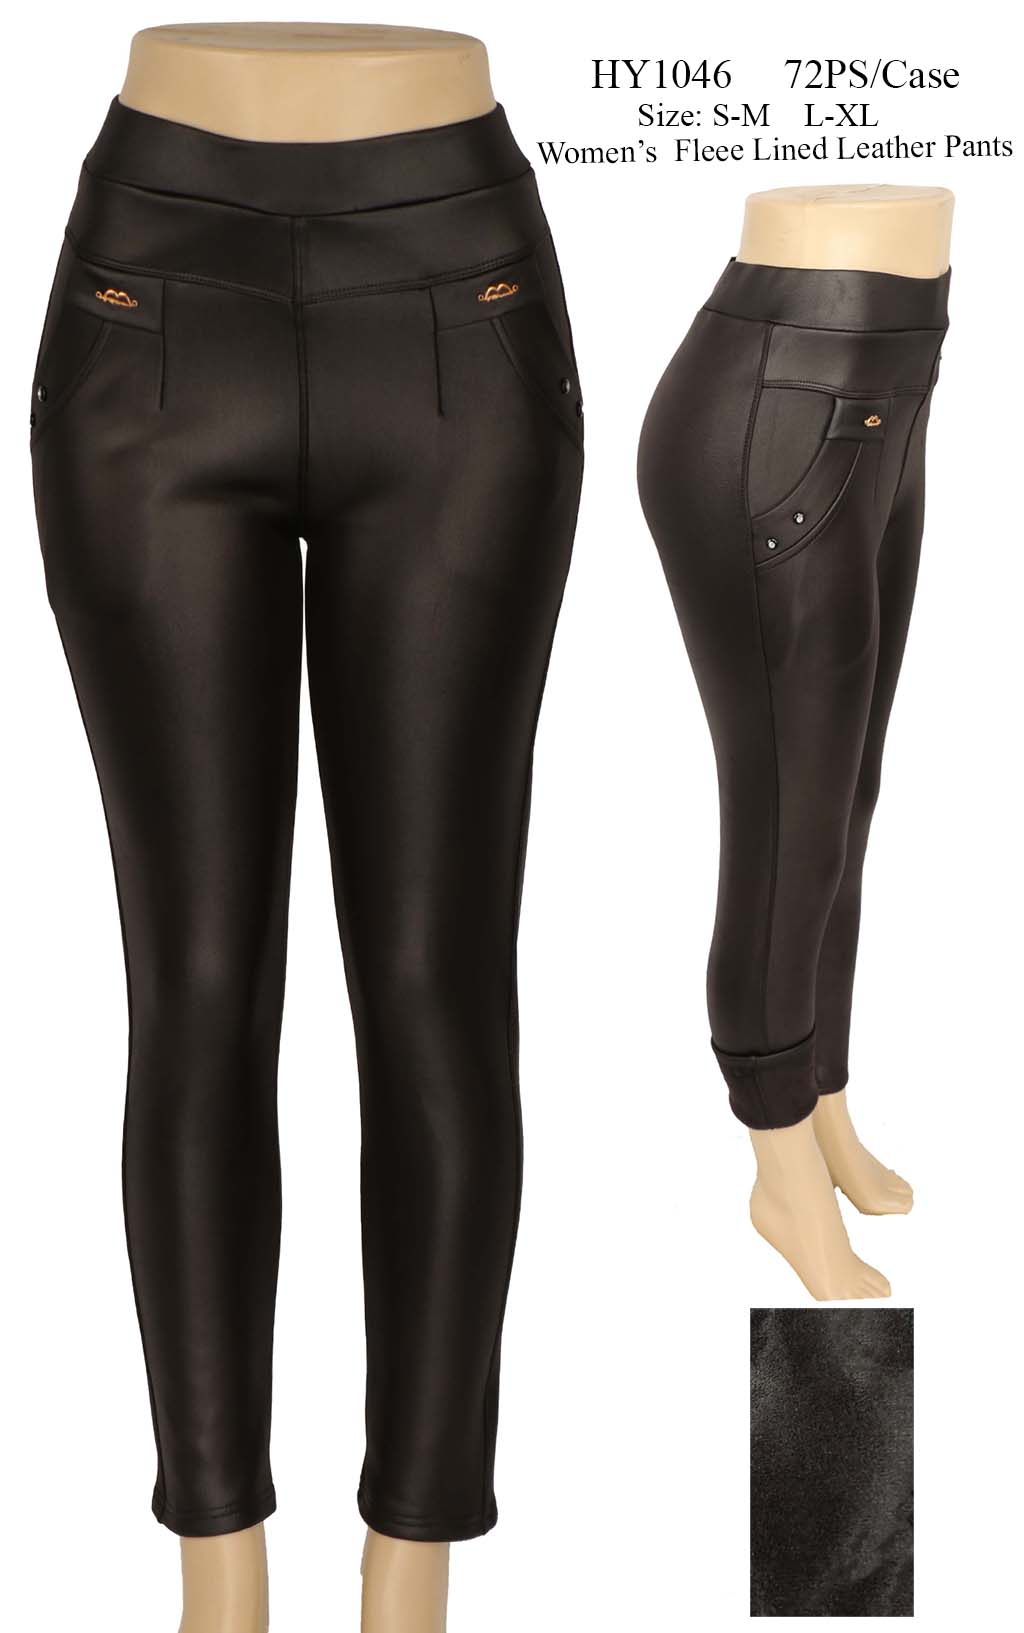 Women's Fleece Lined Leather Pants With Pockets One Dozen Wholesale Size:  S-M, L-XL - Nali Collection, Inc.